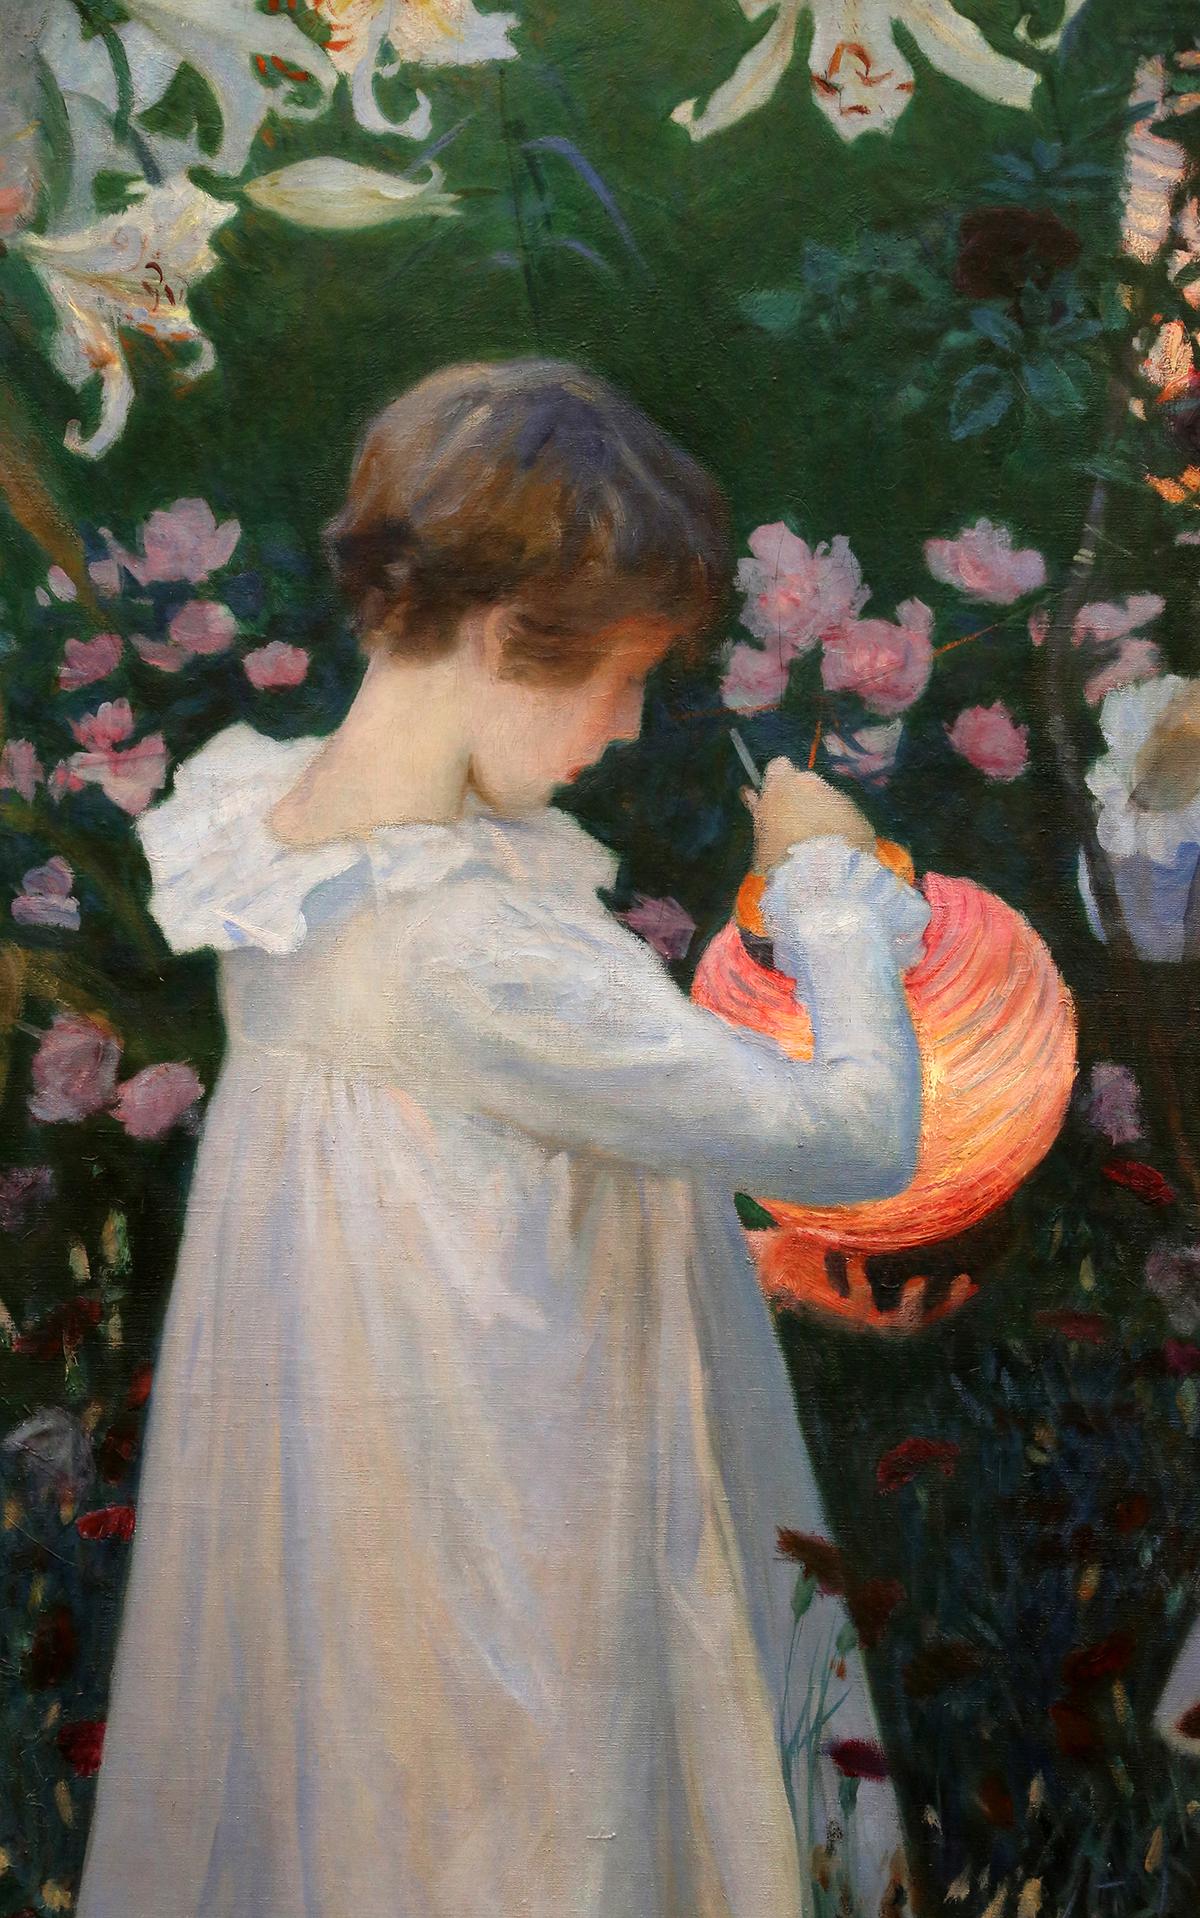 A detail of "Carnation, Lily, Lily, Rose," between 1885 and 1886, by John Singer Sargent. (<a title="User:Sailko" href="https://commons.wikimedia.org/wiki/User:Sailko">Sailko</a>/<a href="https://creativecommons.org/licenses/by/4.0/deed.en">CC BY 4.0 Deed</a>)